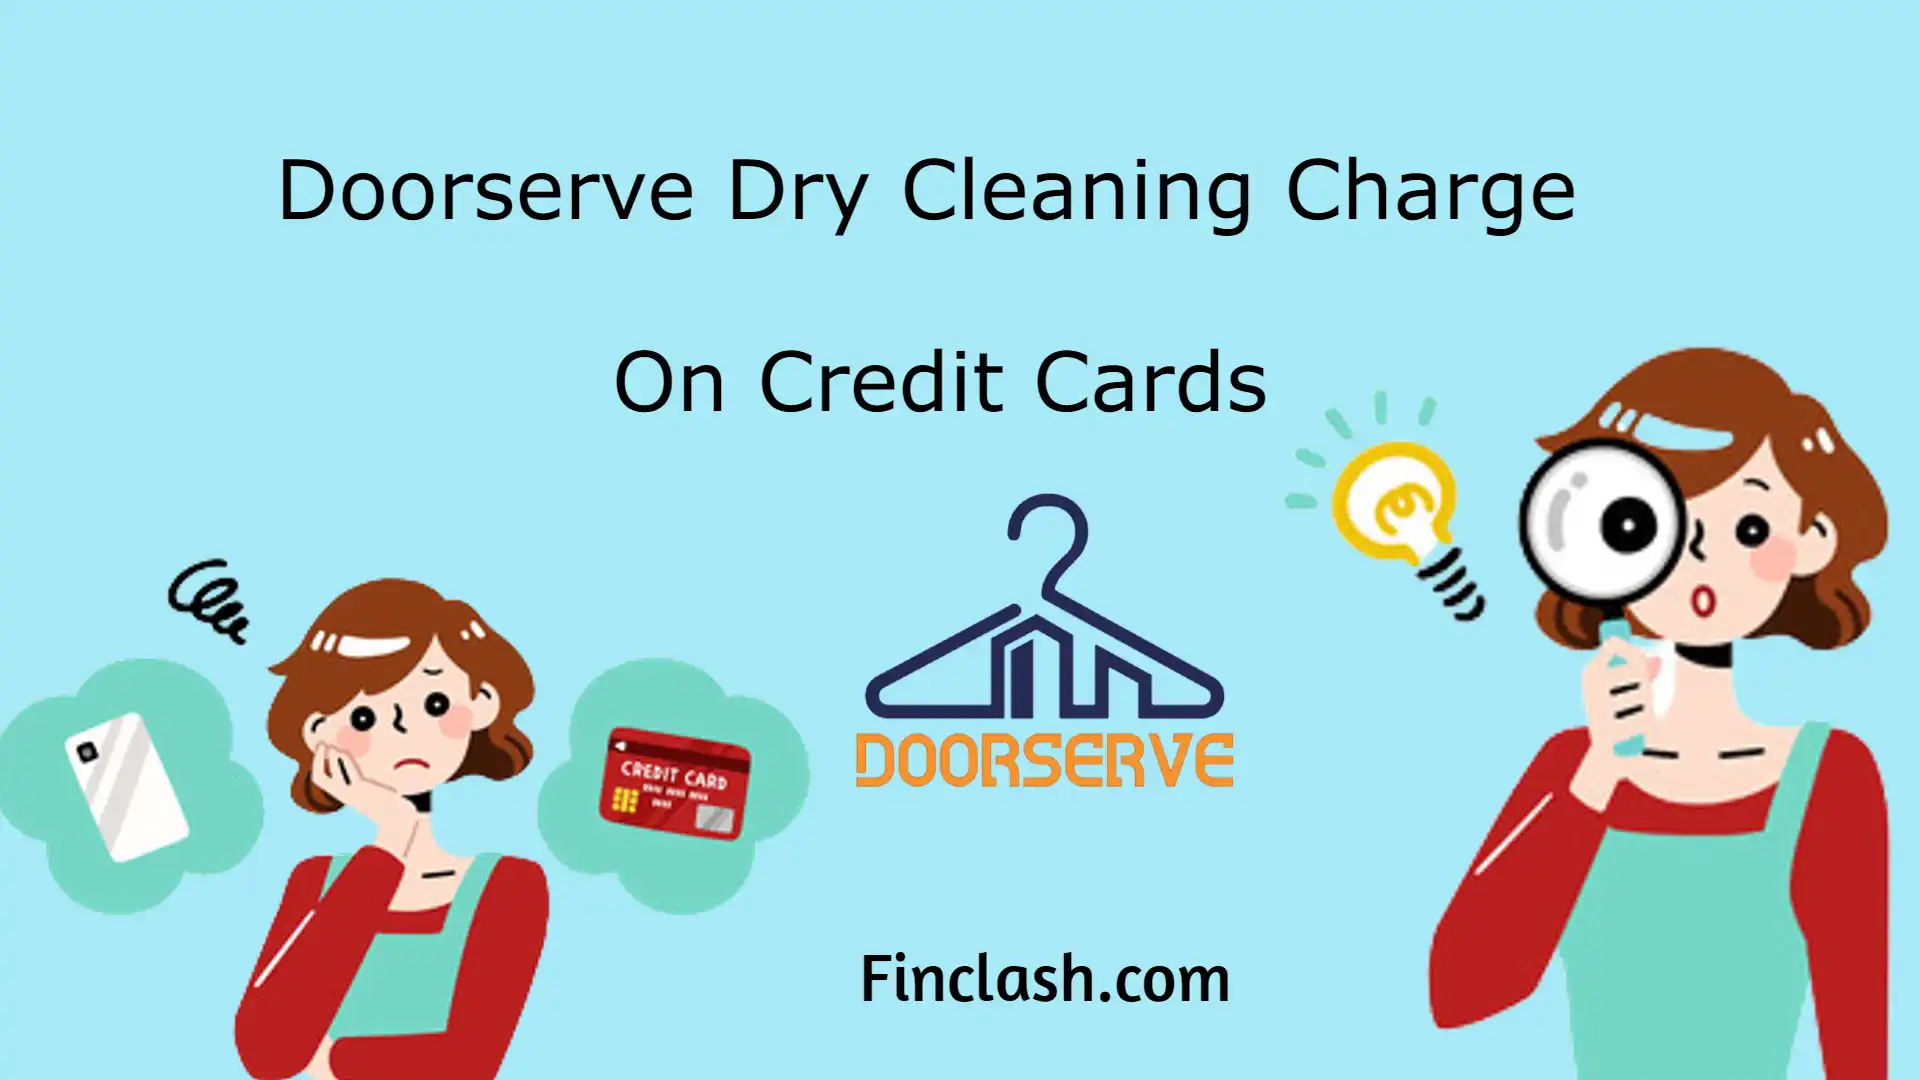 Doorserve Dry Cleaning Charge On Credit Card